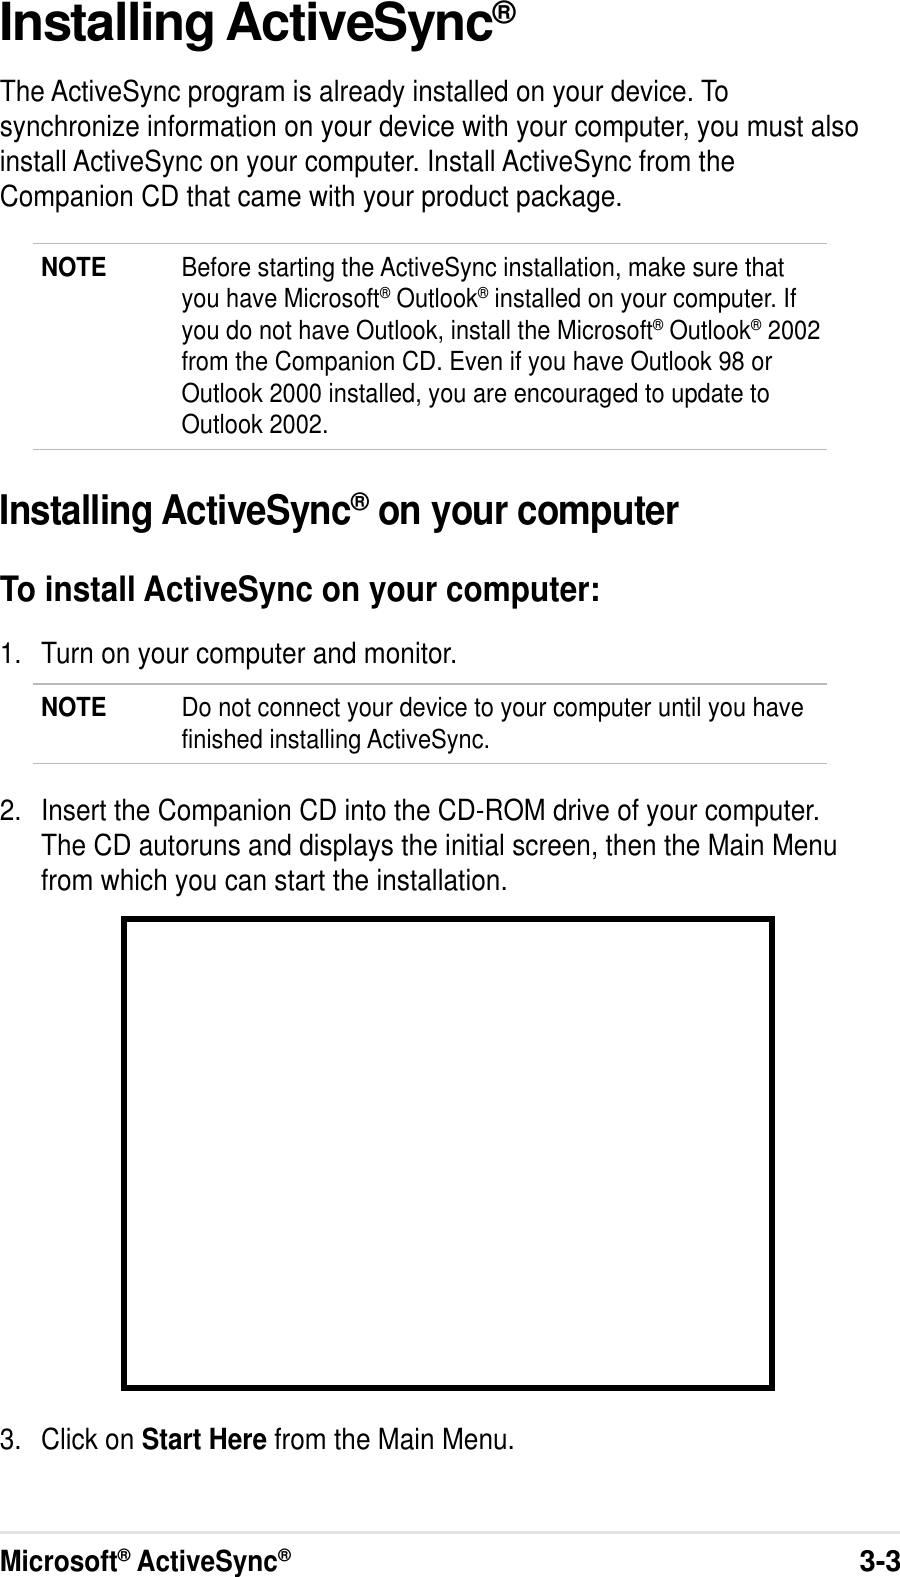 Microsoft® ActiveSync®3-3Installing ActiveSync®The ActiveSync program is already installed on your device. Tosynchronize information on your device with your computer, you must alsoinstall ActiveSync on your computer. Install ActiveSync from theCompanion CD that came with your product package.NOTE Before starting the ActiveSync installation, make sure thatyou have Microsoft® Outlook® installed on your computer. Ifyou do not have Outlook, install the Microsoft® Outlook® 2002from the Companion CD. Even if you have Outlook 98 orOutlook 2000 installed, you are encouraged to update toOutlook 2002.Installing ActiveSync® on your computerTo install ActiveSync on your computer:1. Turn on your computer and monitor.NOTE Do not connect your device to your computer until you havefinished installing ActiveSync.2. Insert the Companion CD into the CD-ROM drive of your computer.The CD autoruns and displays the initial screen, then the Main Menufrom which you can start the installation.3. Click on Start Here from the Main Menu.